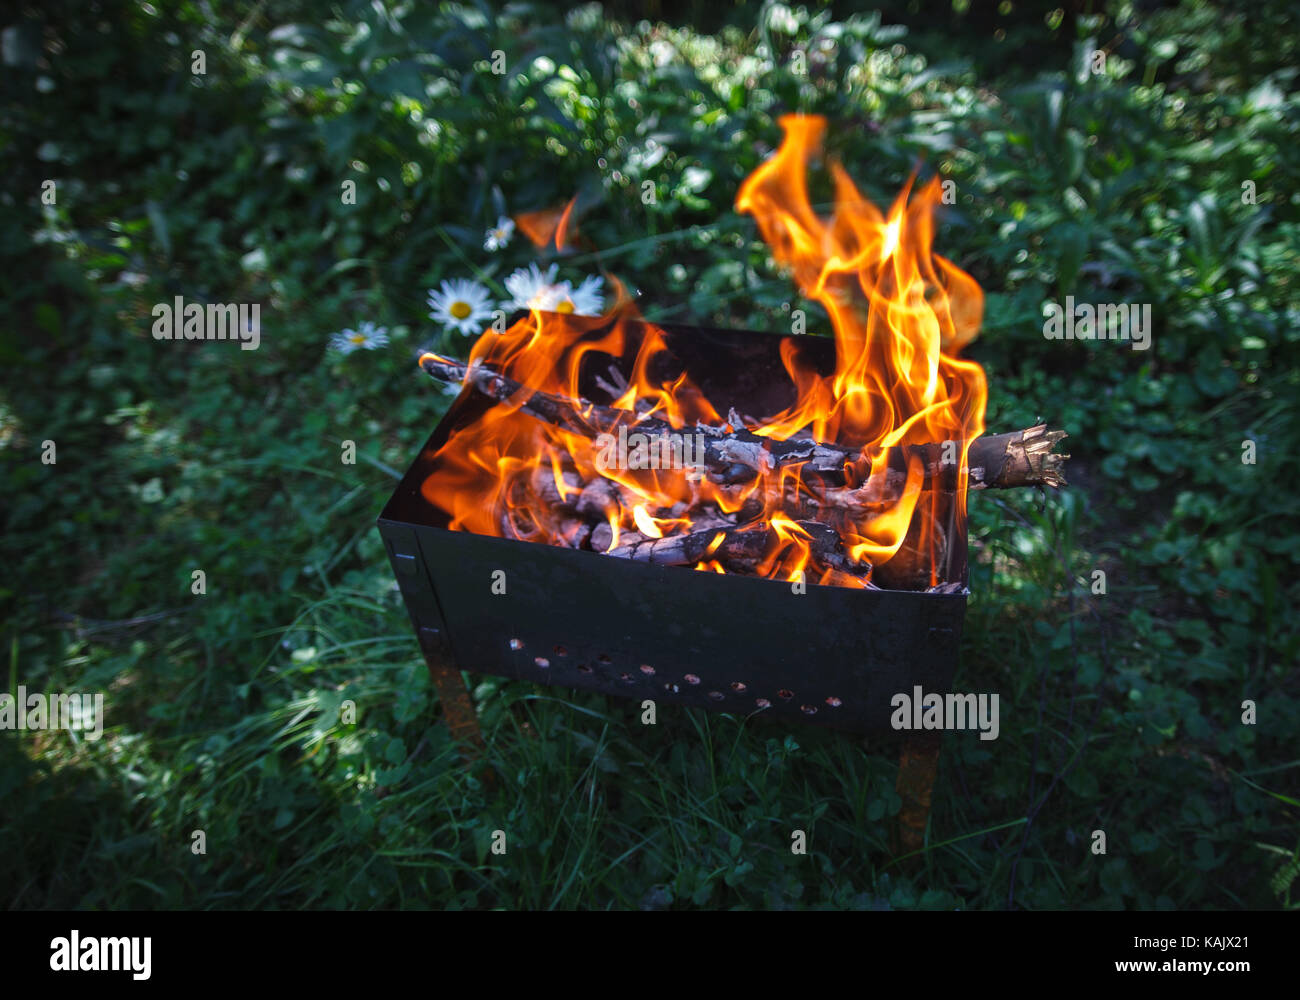 Burning coals in the mangal on the green grass background Stock Photo